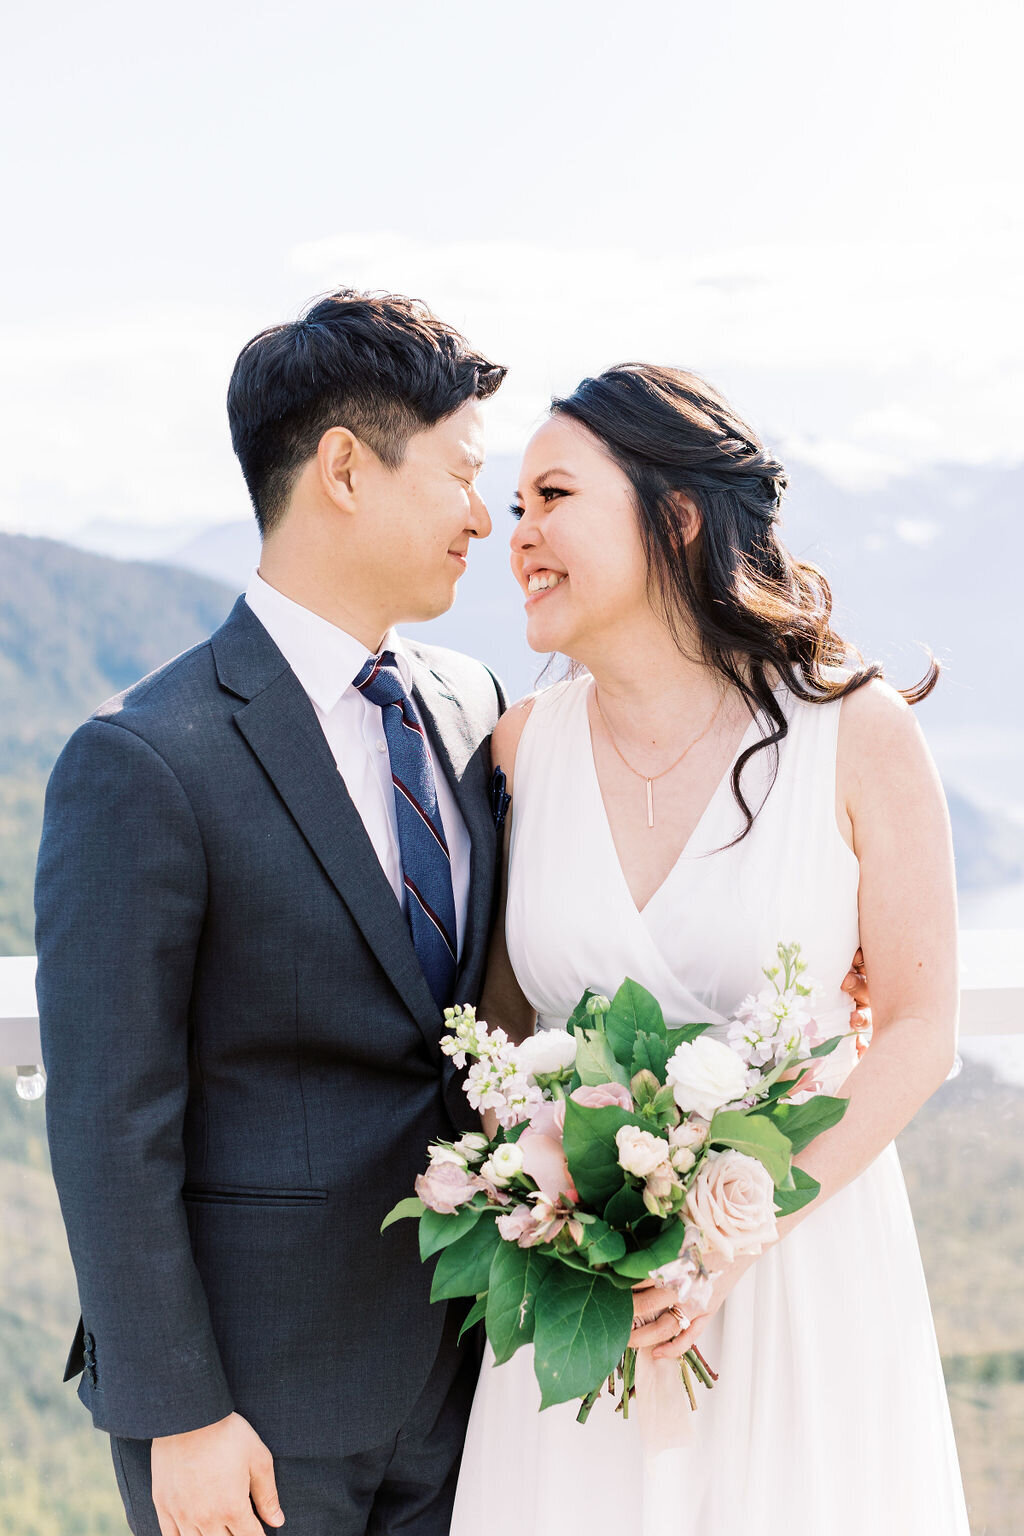 Bride and groom at Sea to Sky Gondola Squamish wedding - Within the Flowers